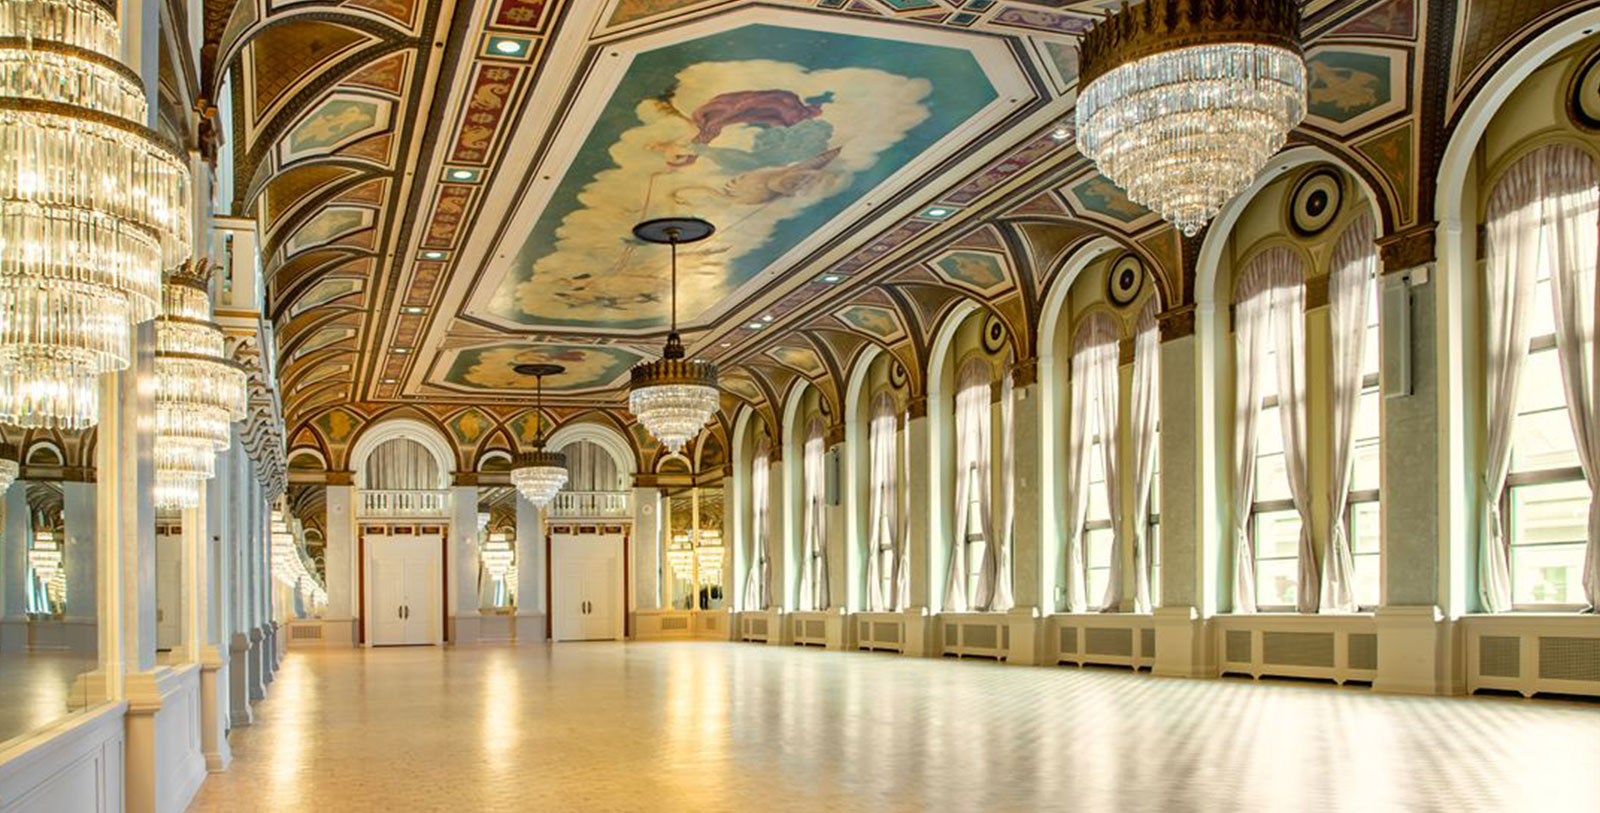 Image of Event Space with Murals Fairmont Royal York, 1929, Member of Historic Hotels Worldwide in Toronto, Canada, Special Occasions